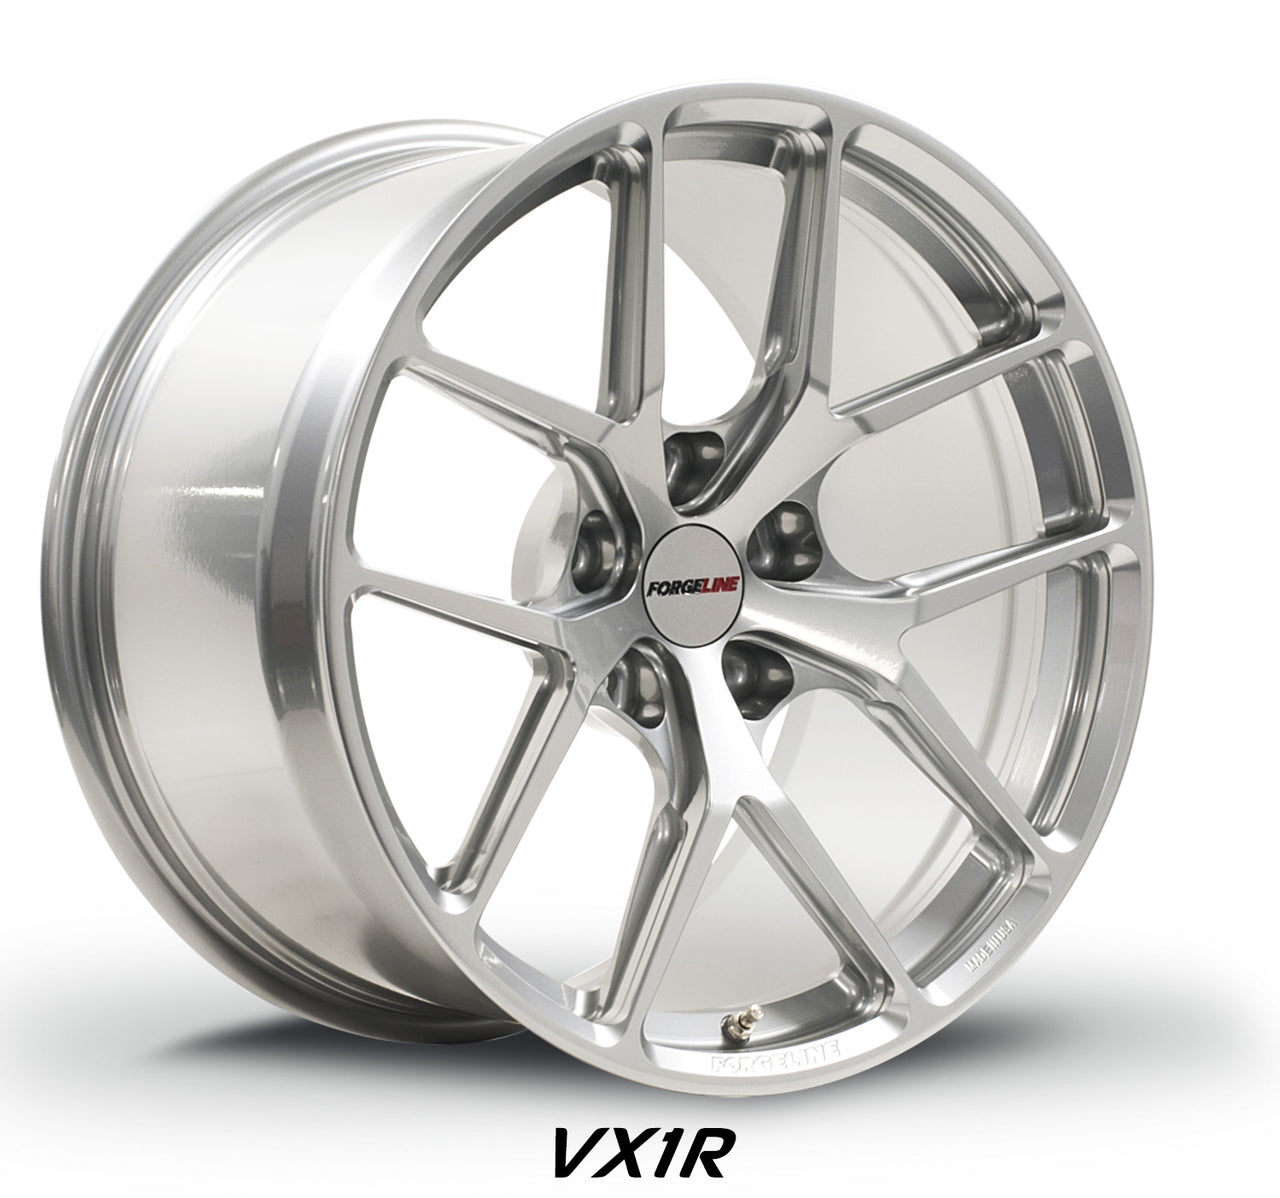 Forgeline VX1R Motorsport Series racing wheel in Polished Silver strong light fast!